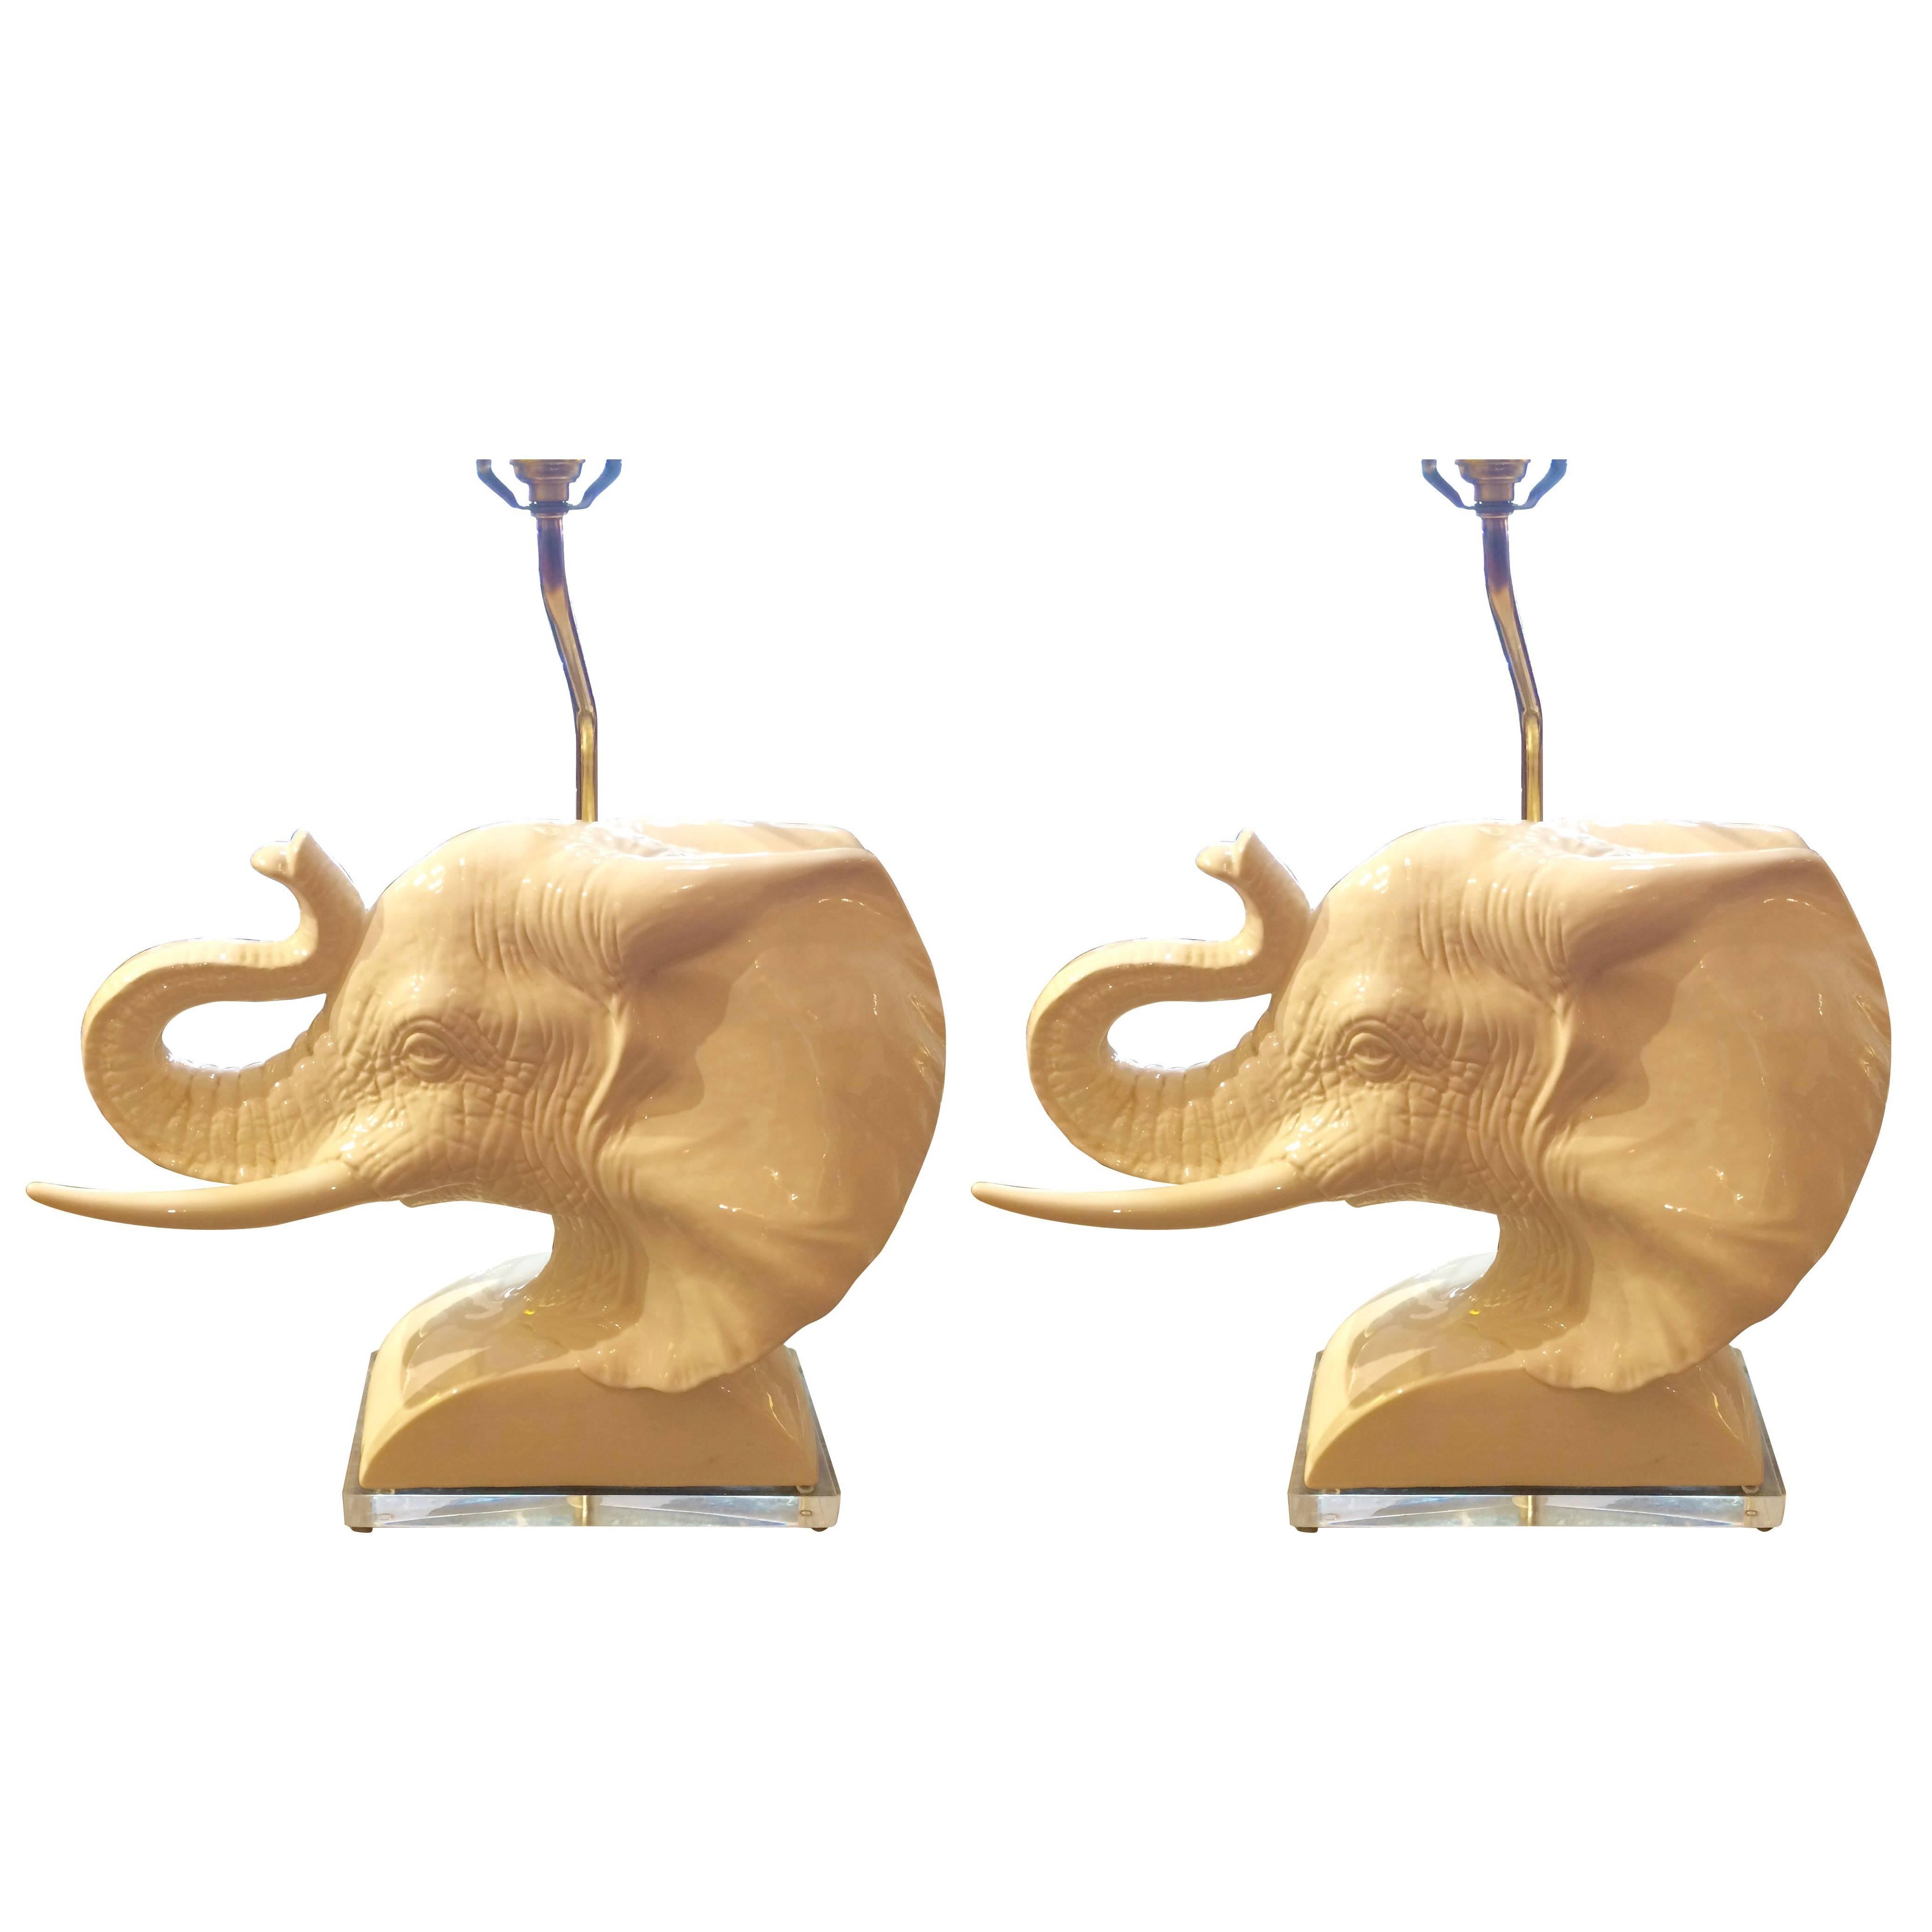 Pair of Sculptural Mid-Century Modern Ceramic Elephant Bust Table Lamps For Sale